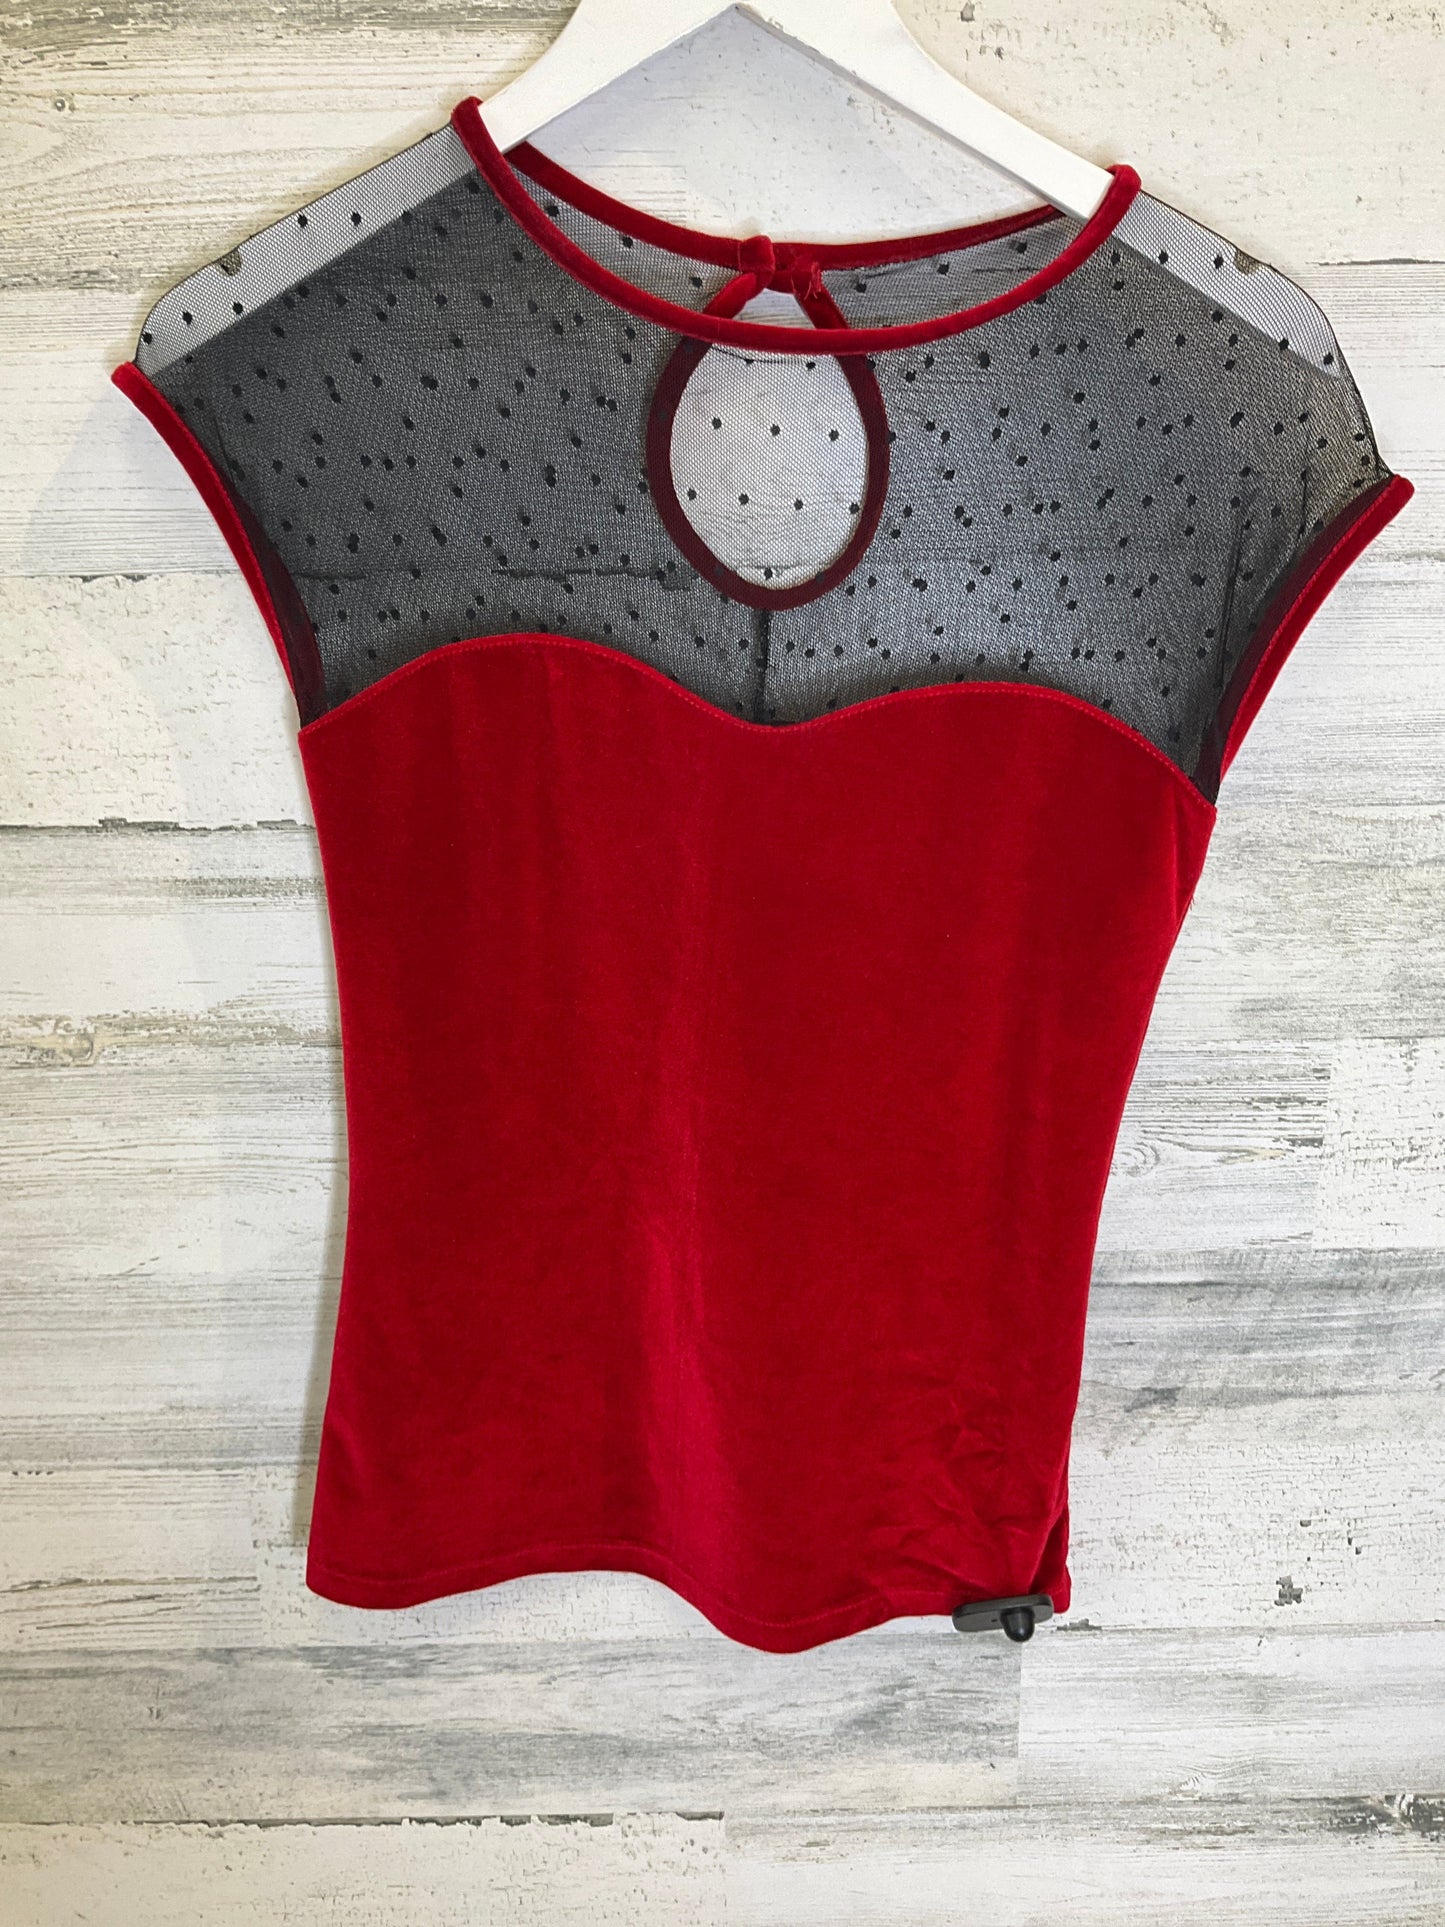 Black & Red Top Short Sleeve Clothes Mentor, Size M